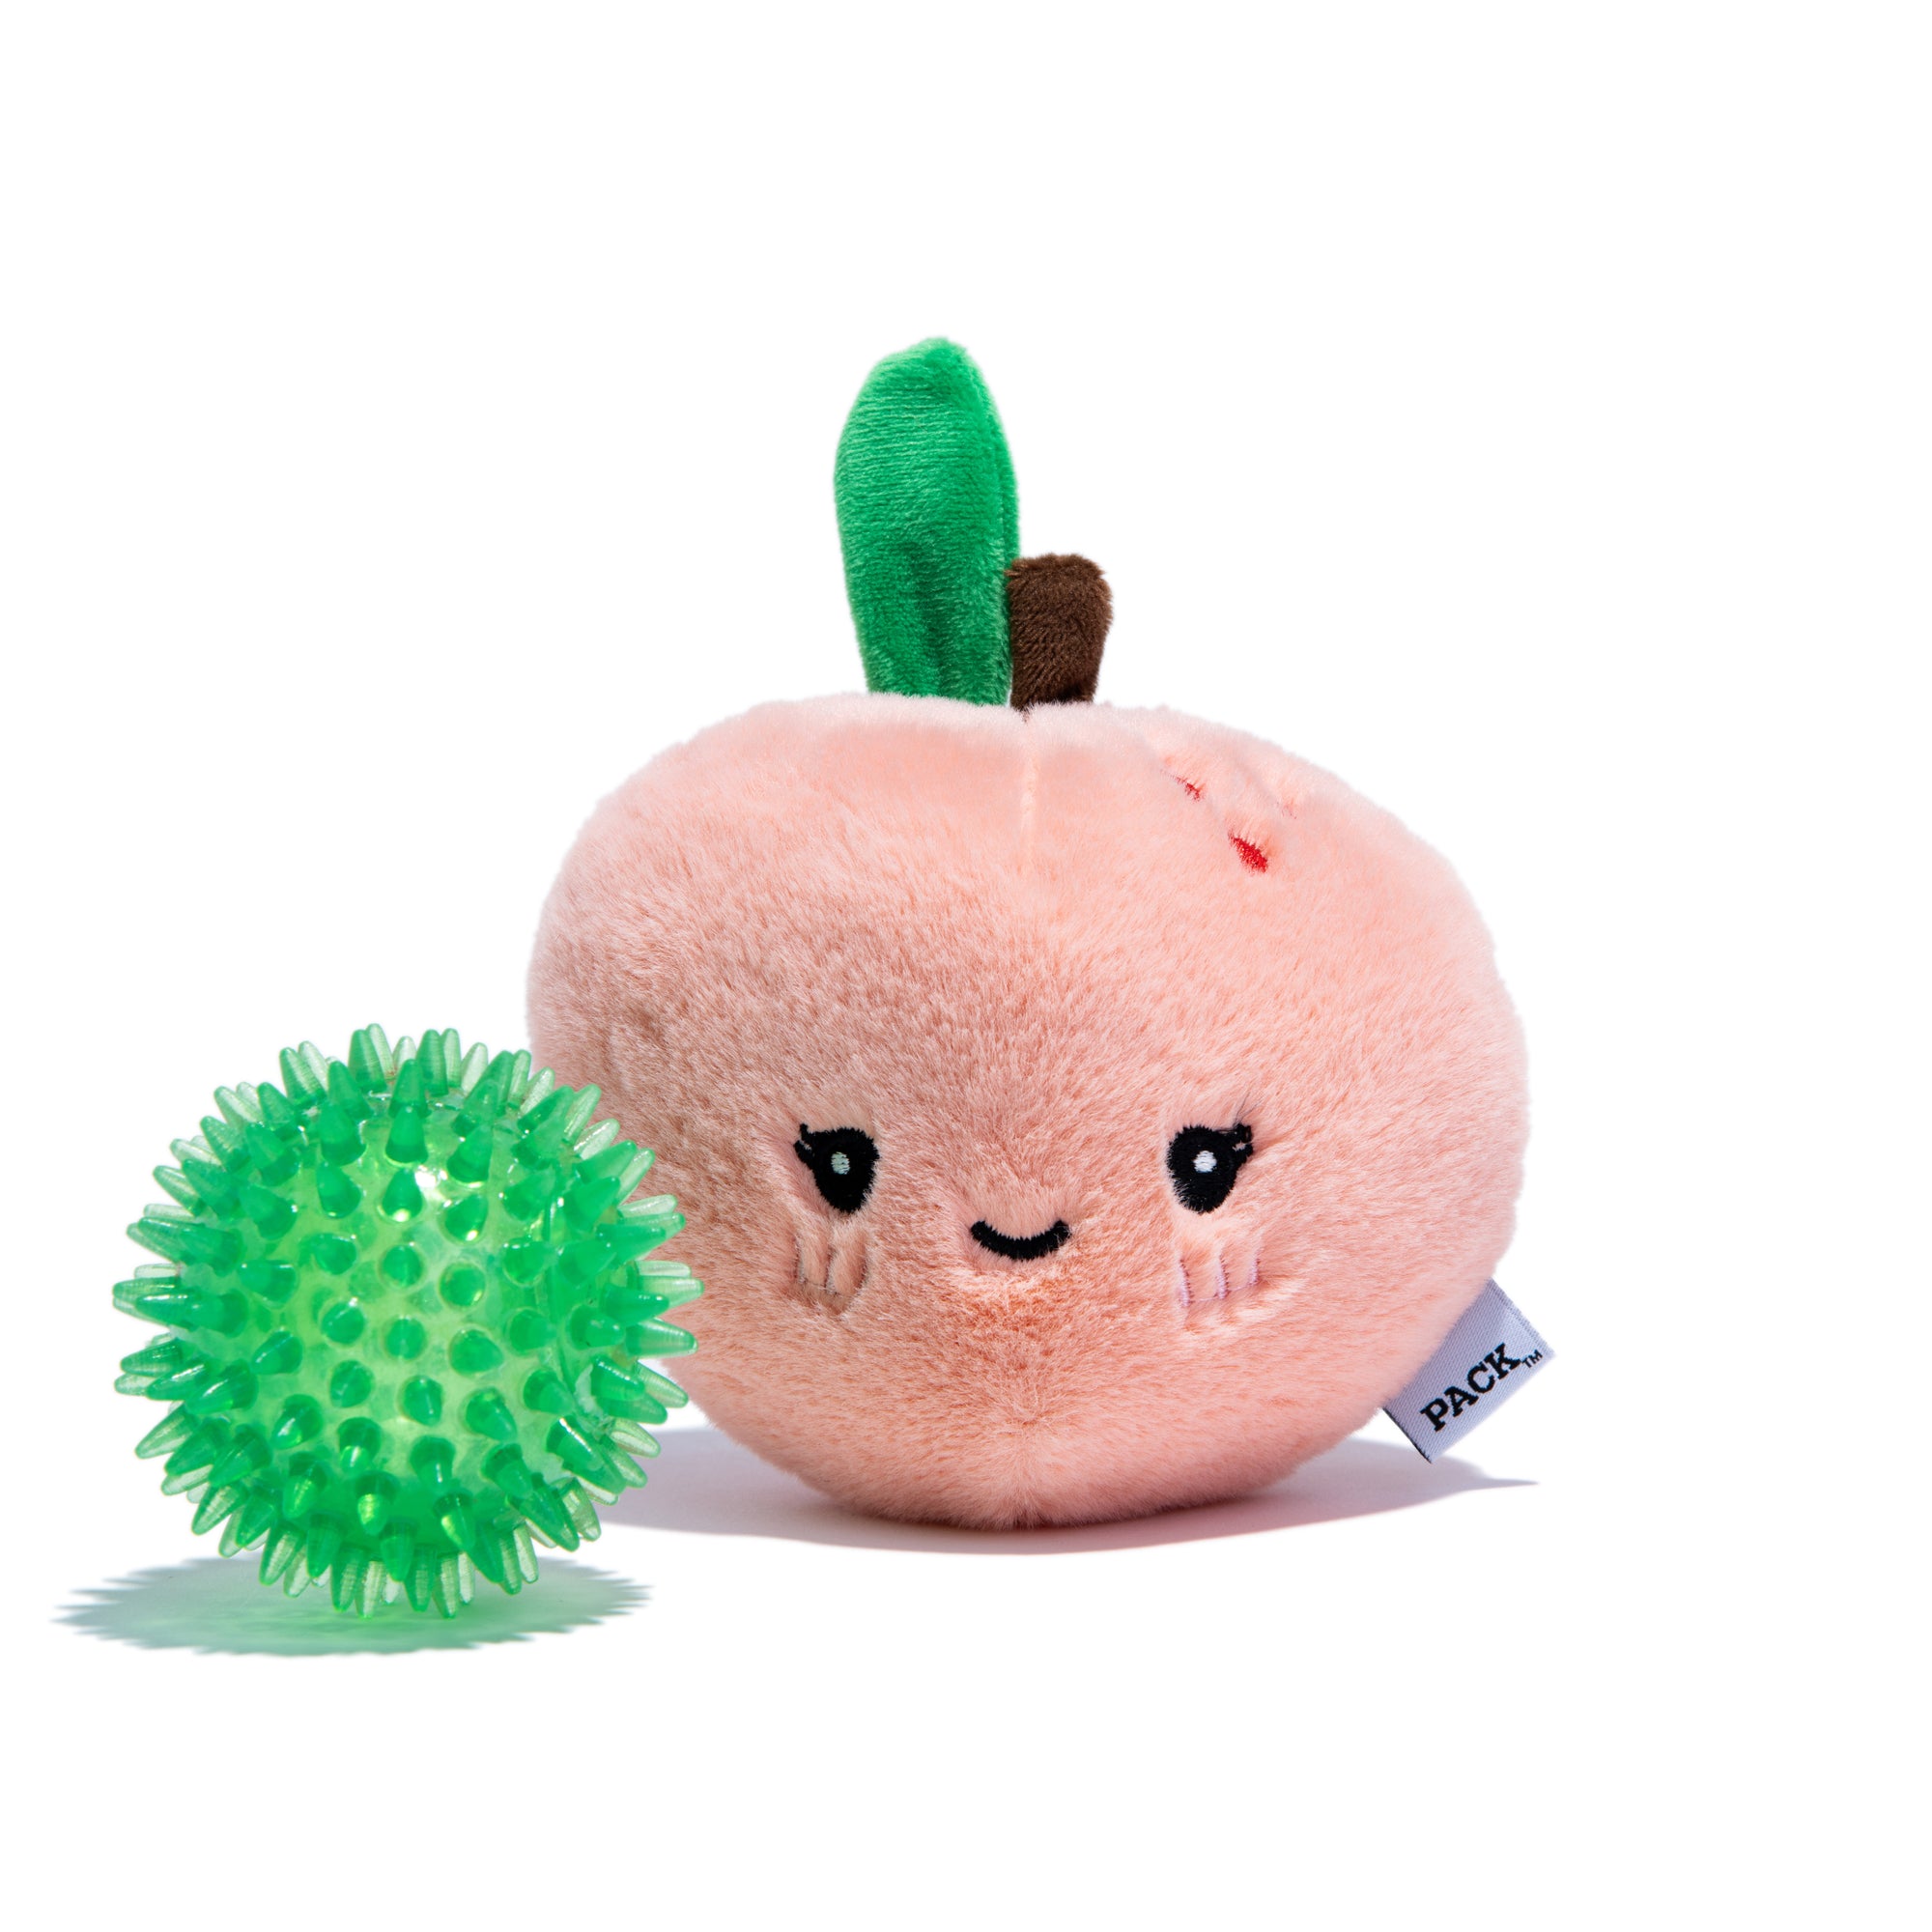 Mrs Peachy (2-in-1 Toy)